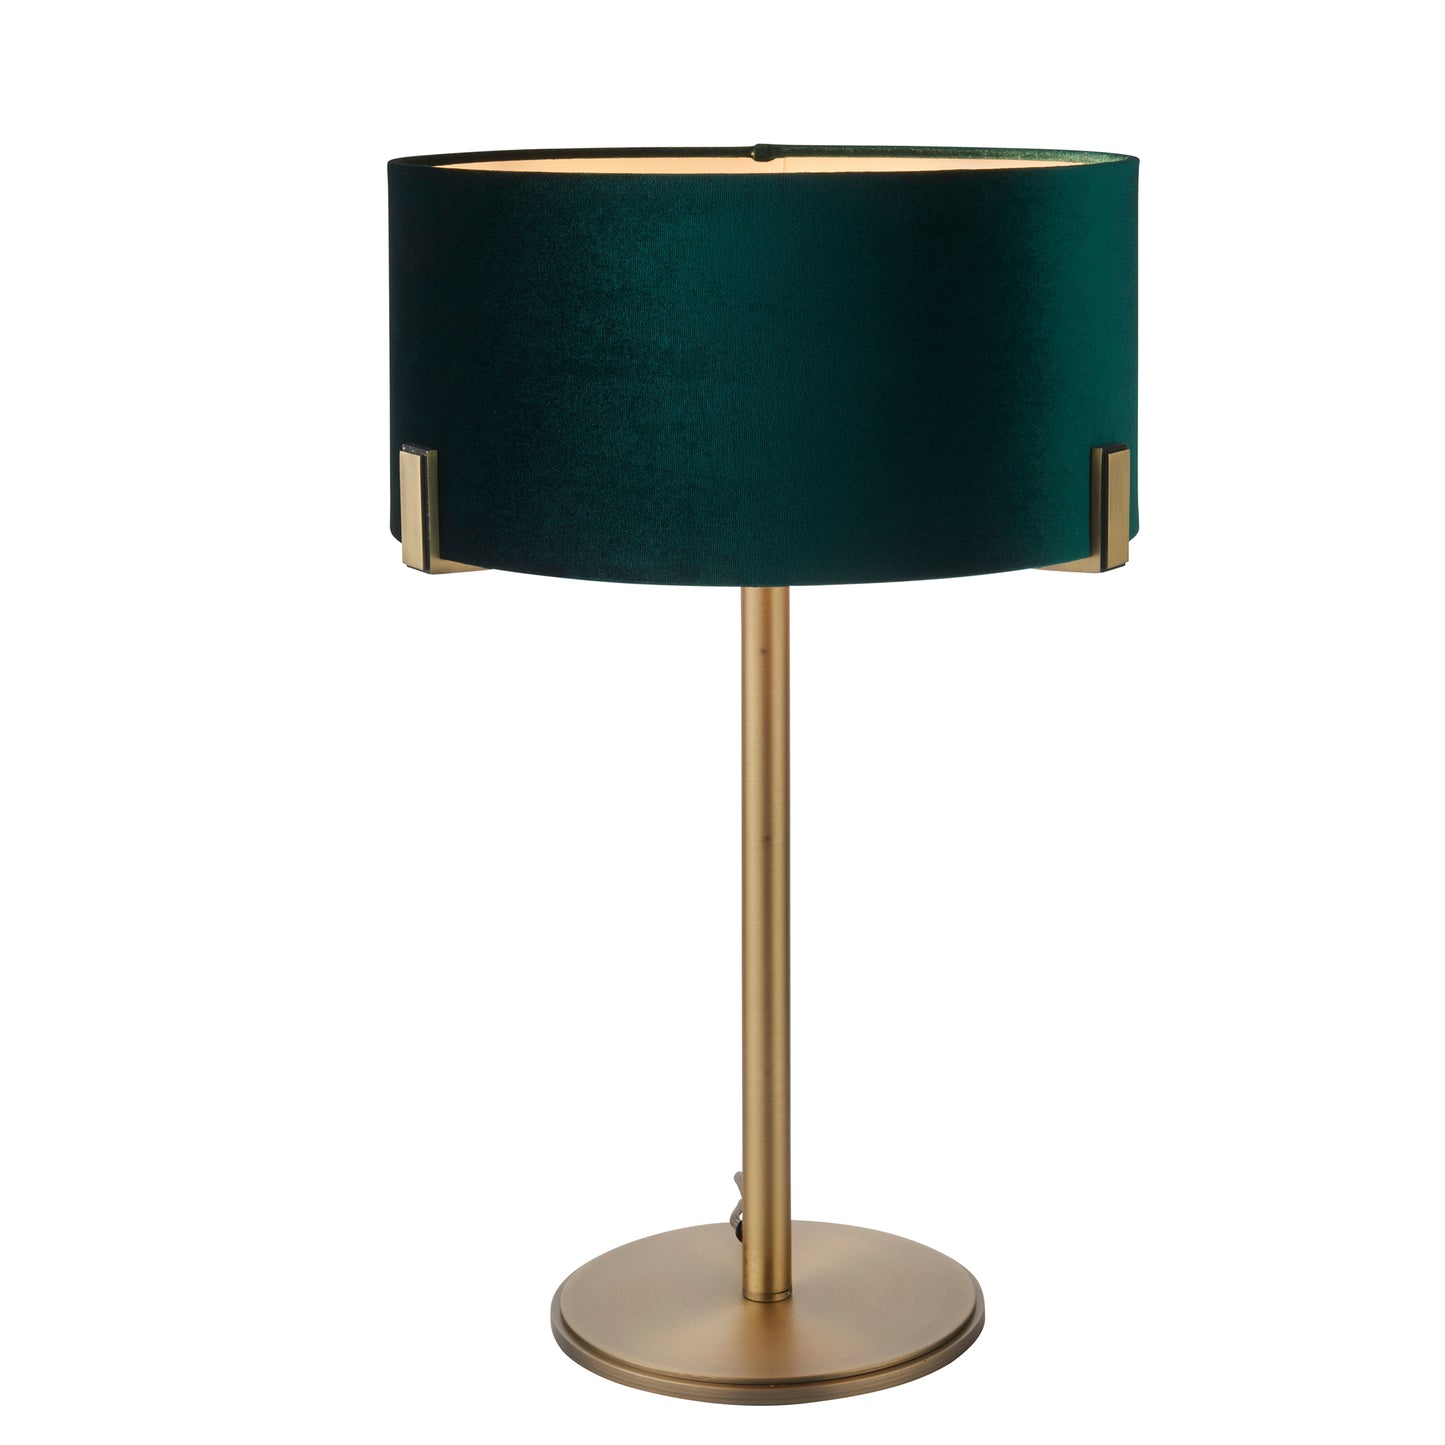 A vintage Hayfield Table Lamp with a green shade, perfect for interior decor.